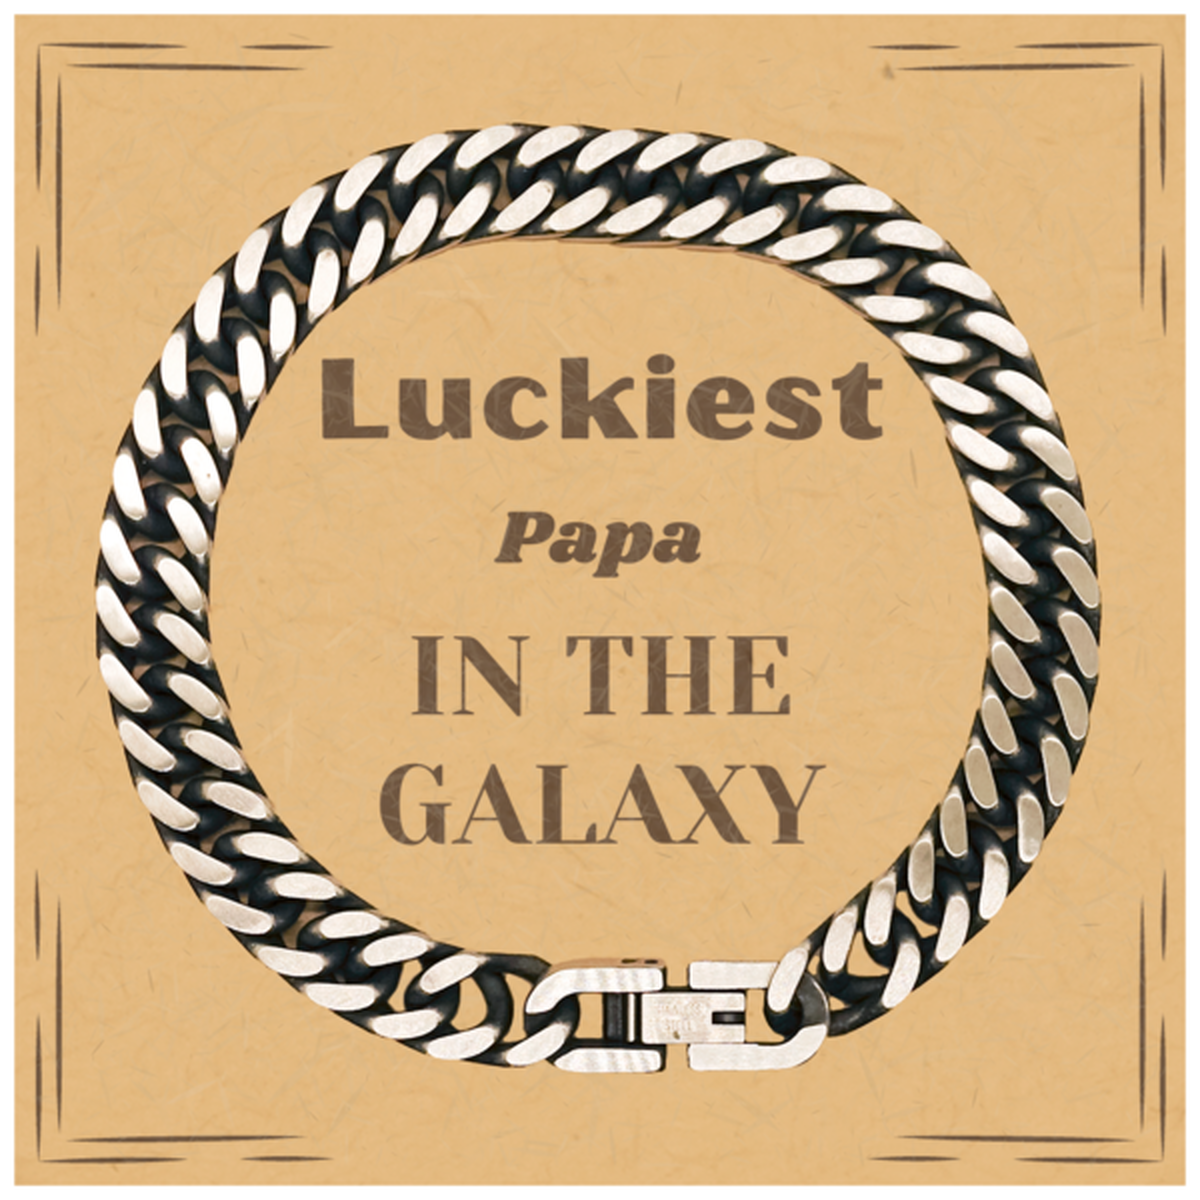 Luckiest Papa in the Galaxy, To My Papa Message Card Gifts, Christmas Papa Cuban Link Chain Bracelet Gifts, X-mas Birthday Unique Gifts For Papa Men Women